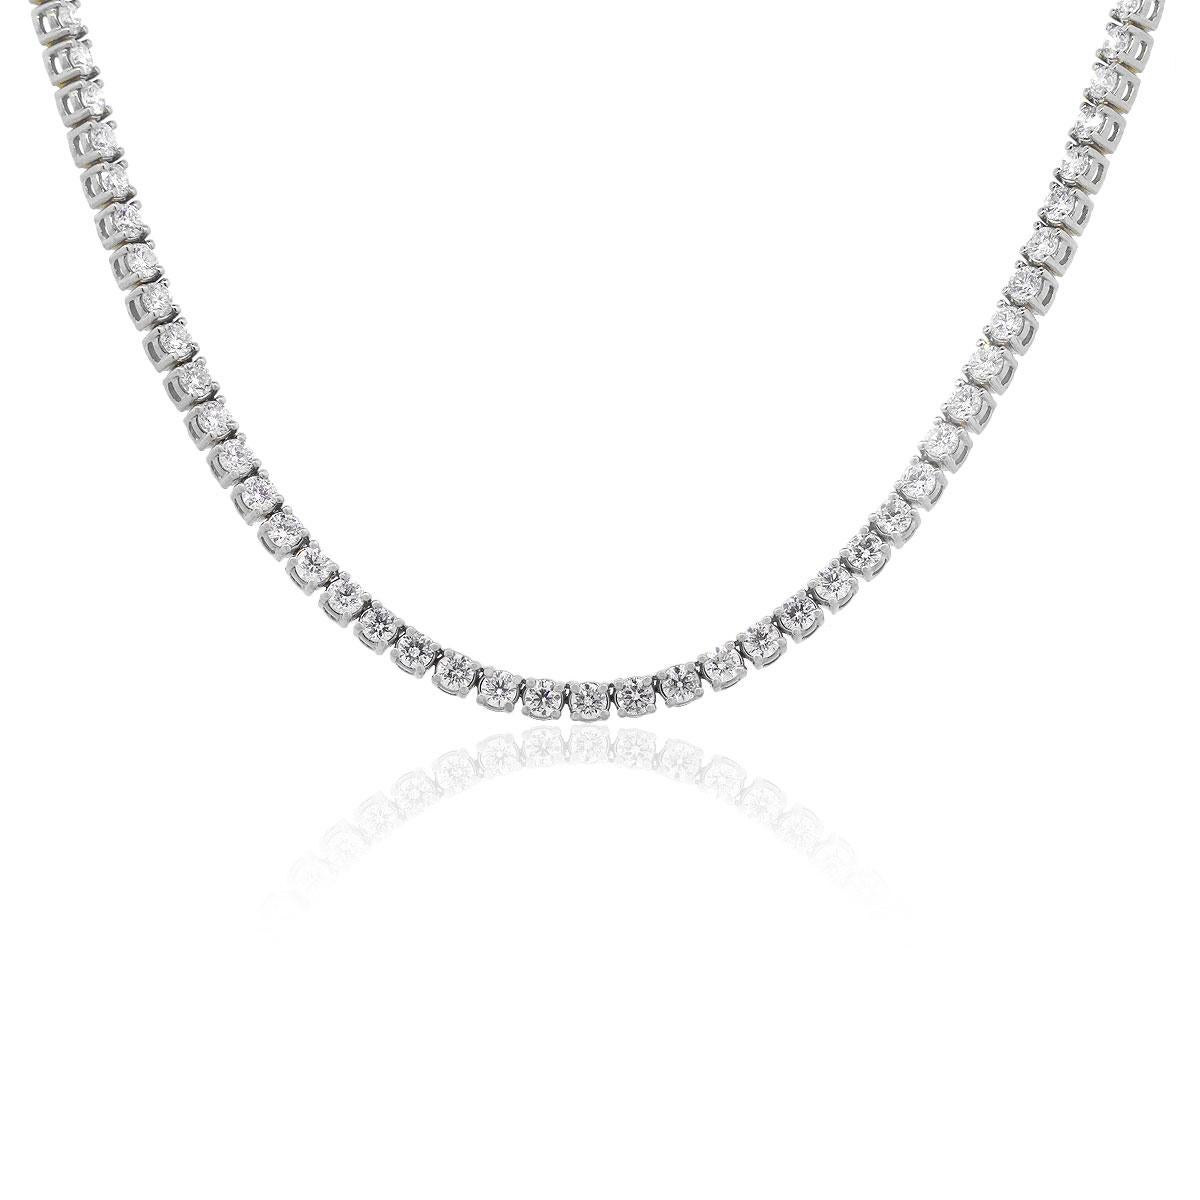 Material: 14k White Gold
Diamond Details: 138 stones, approx. 29.46ctw of round brilliant diamonds. Diamonds are G/H in color and SI in clarity
Measurements: Necklace measures 22″ in length.
Fastening: Tongue in box clasp with safety latch
Item